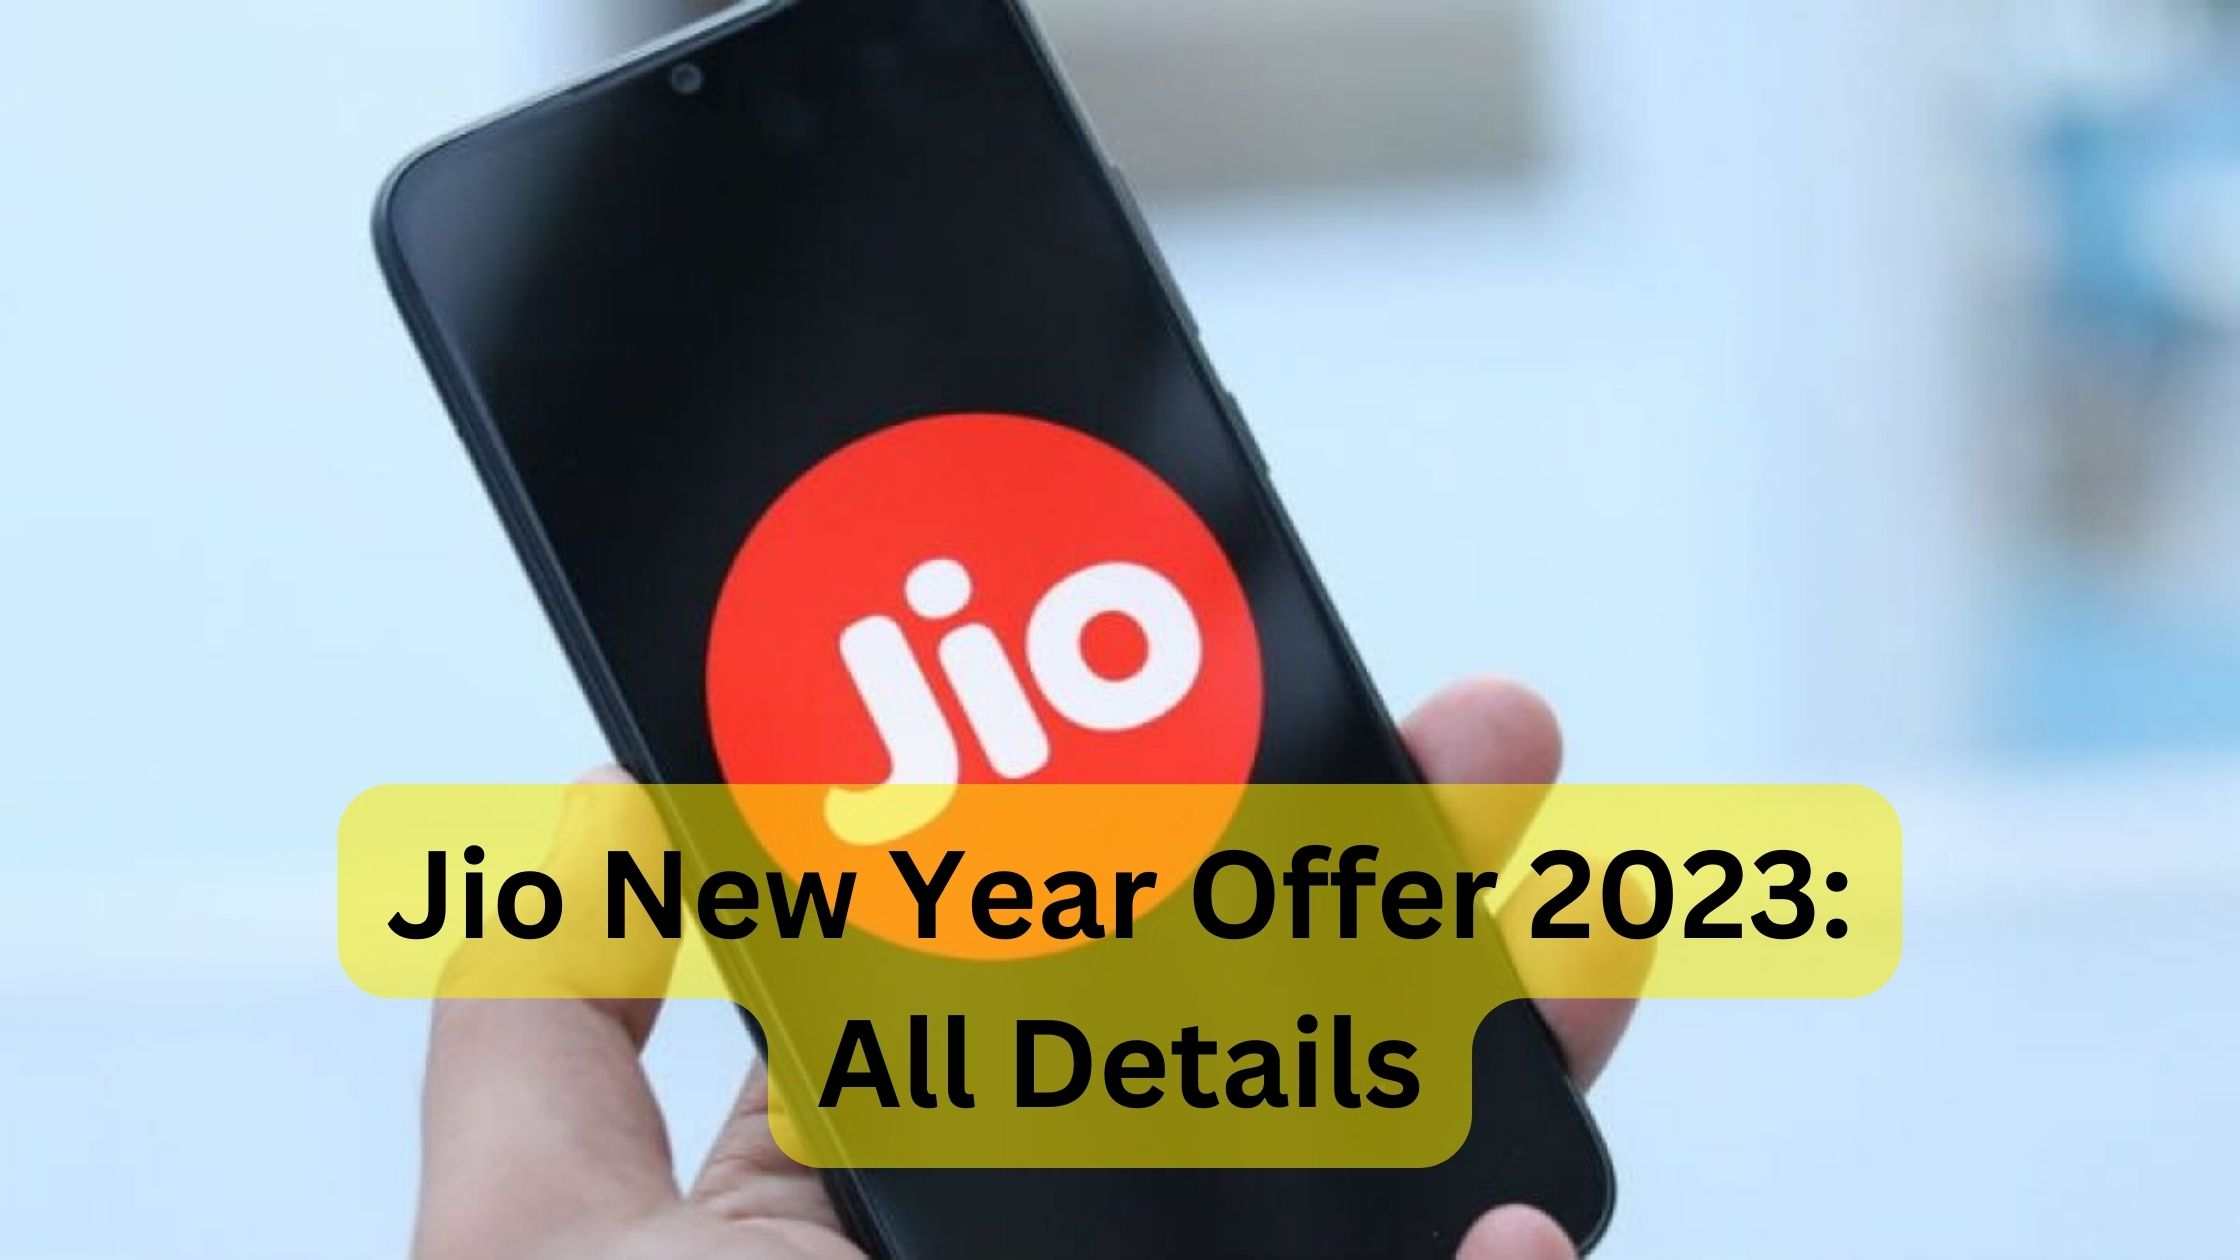 Jio New Year Offer 2023